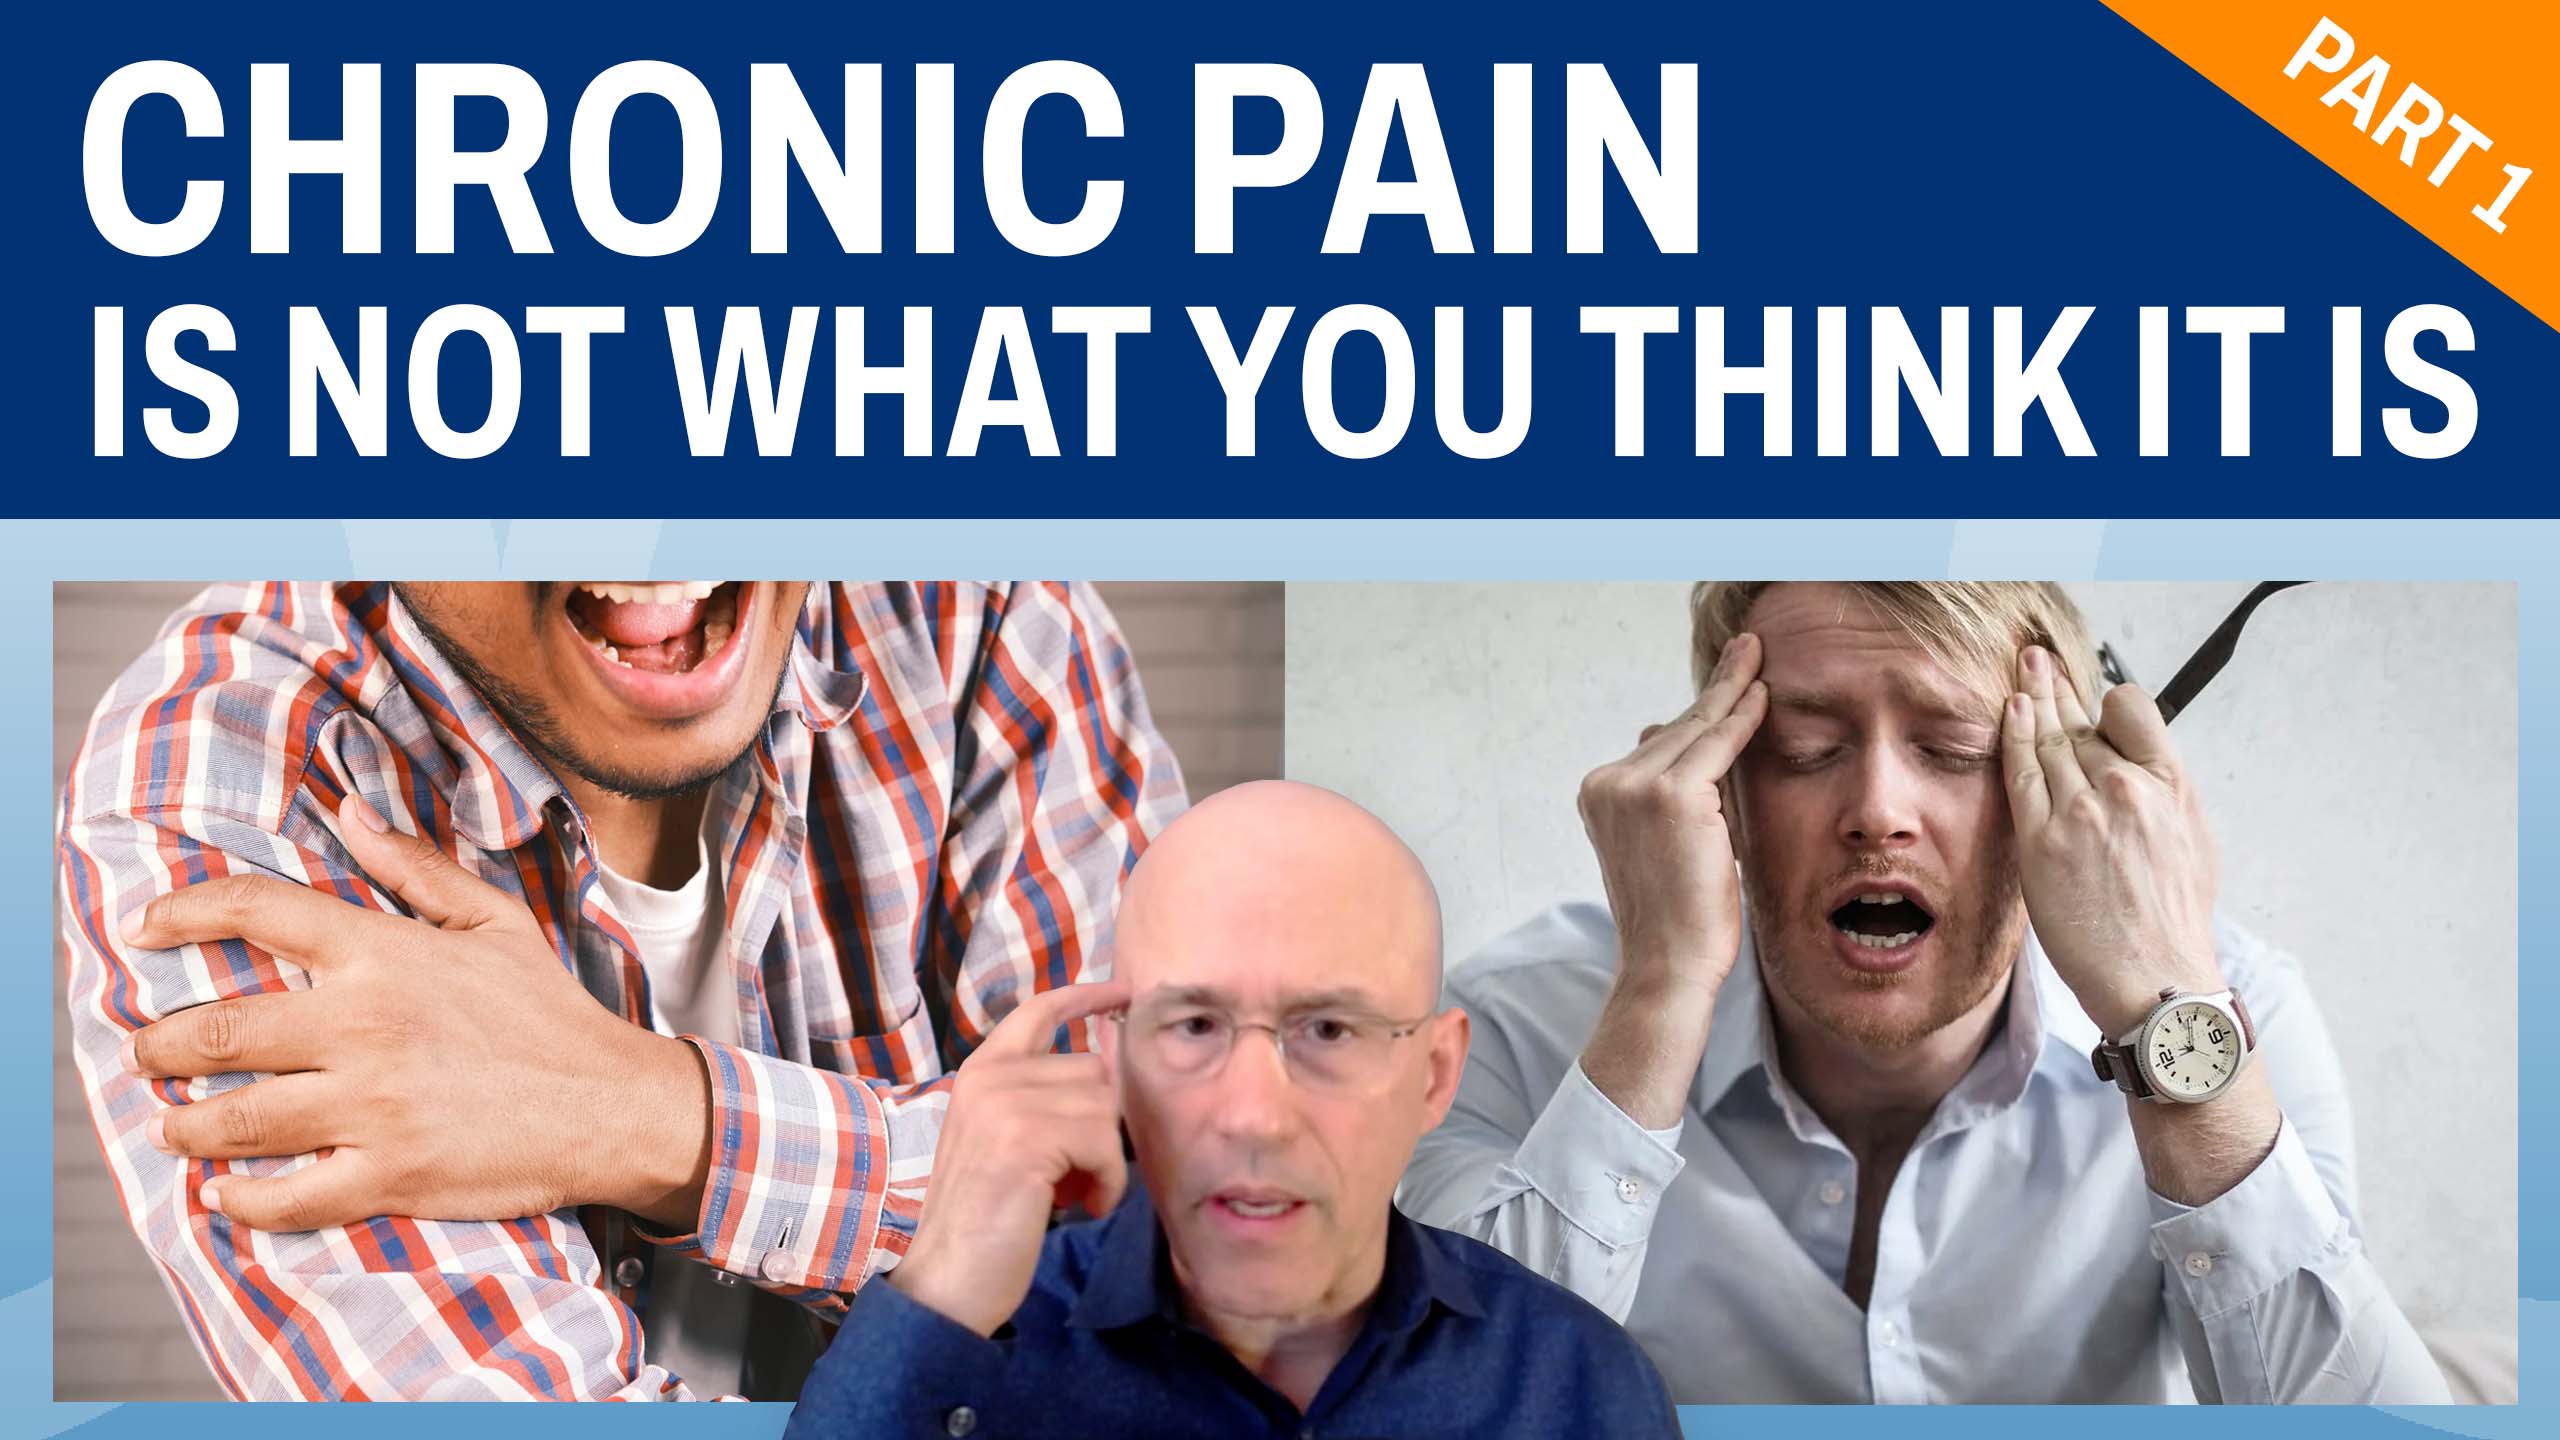 Chronic pain is not what you think part 1 video thumbnail